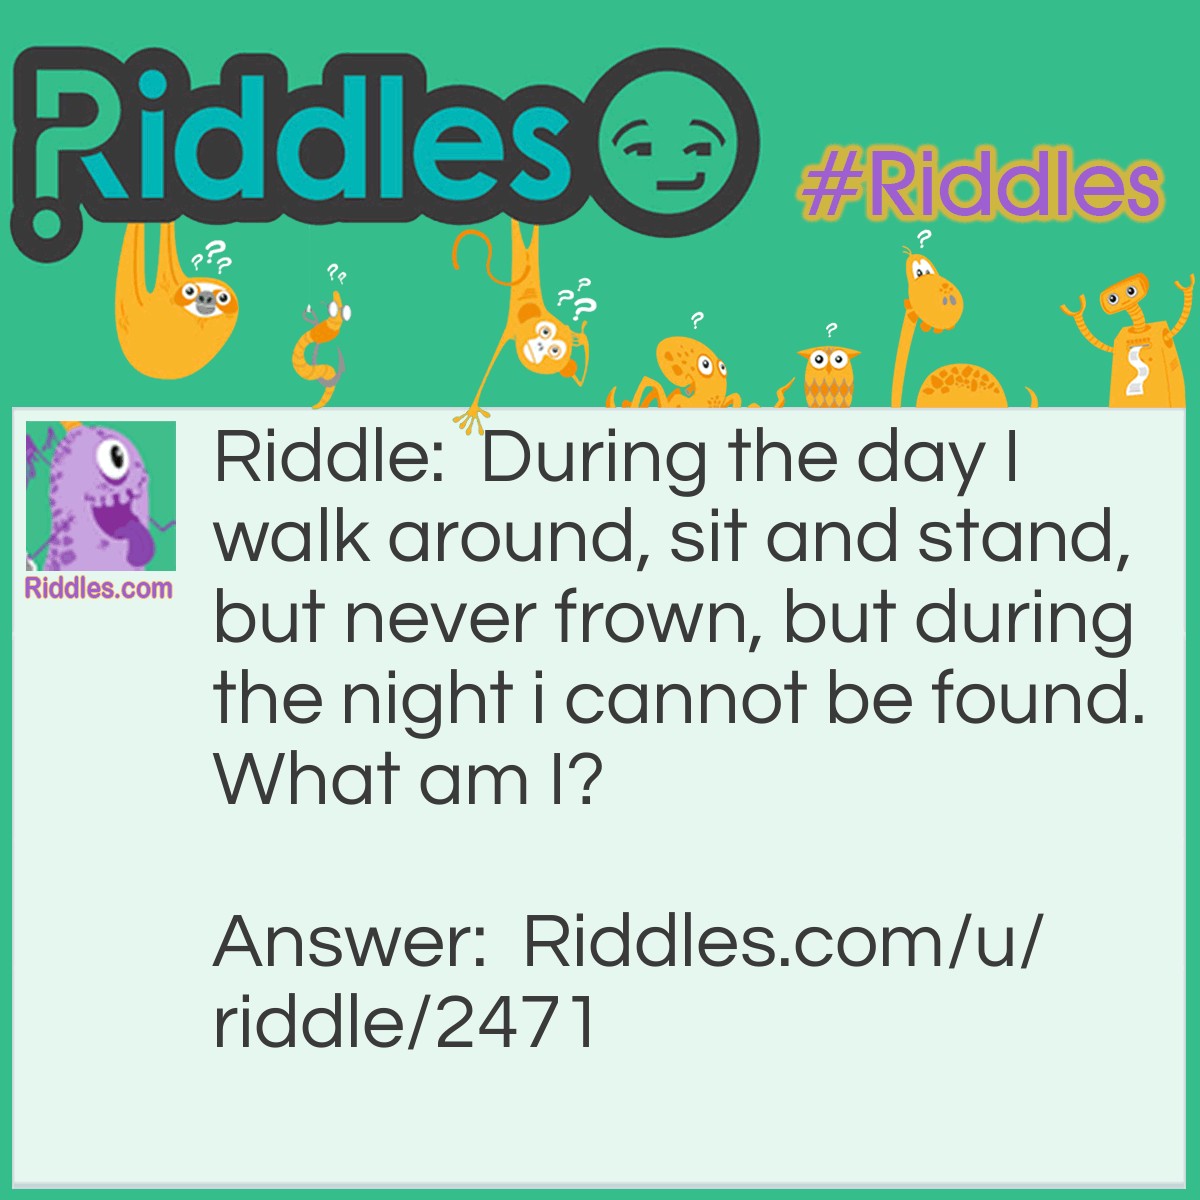 Riddle: During the day I walk around, sit and stand, but never frown, but during the night i cannot be found. What am I? Answer: A shadow.